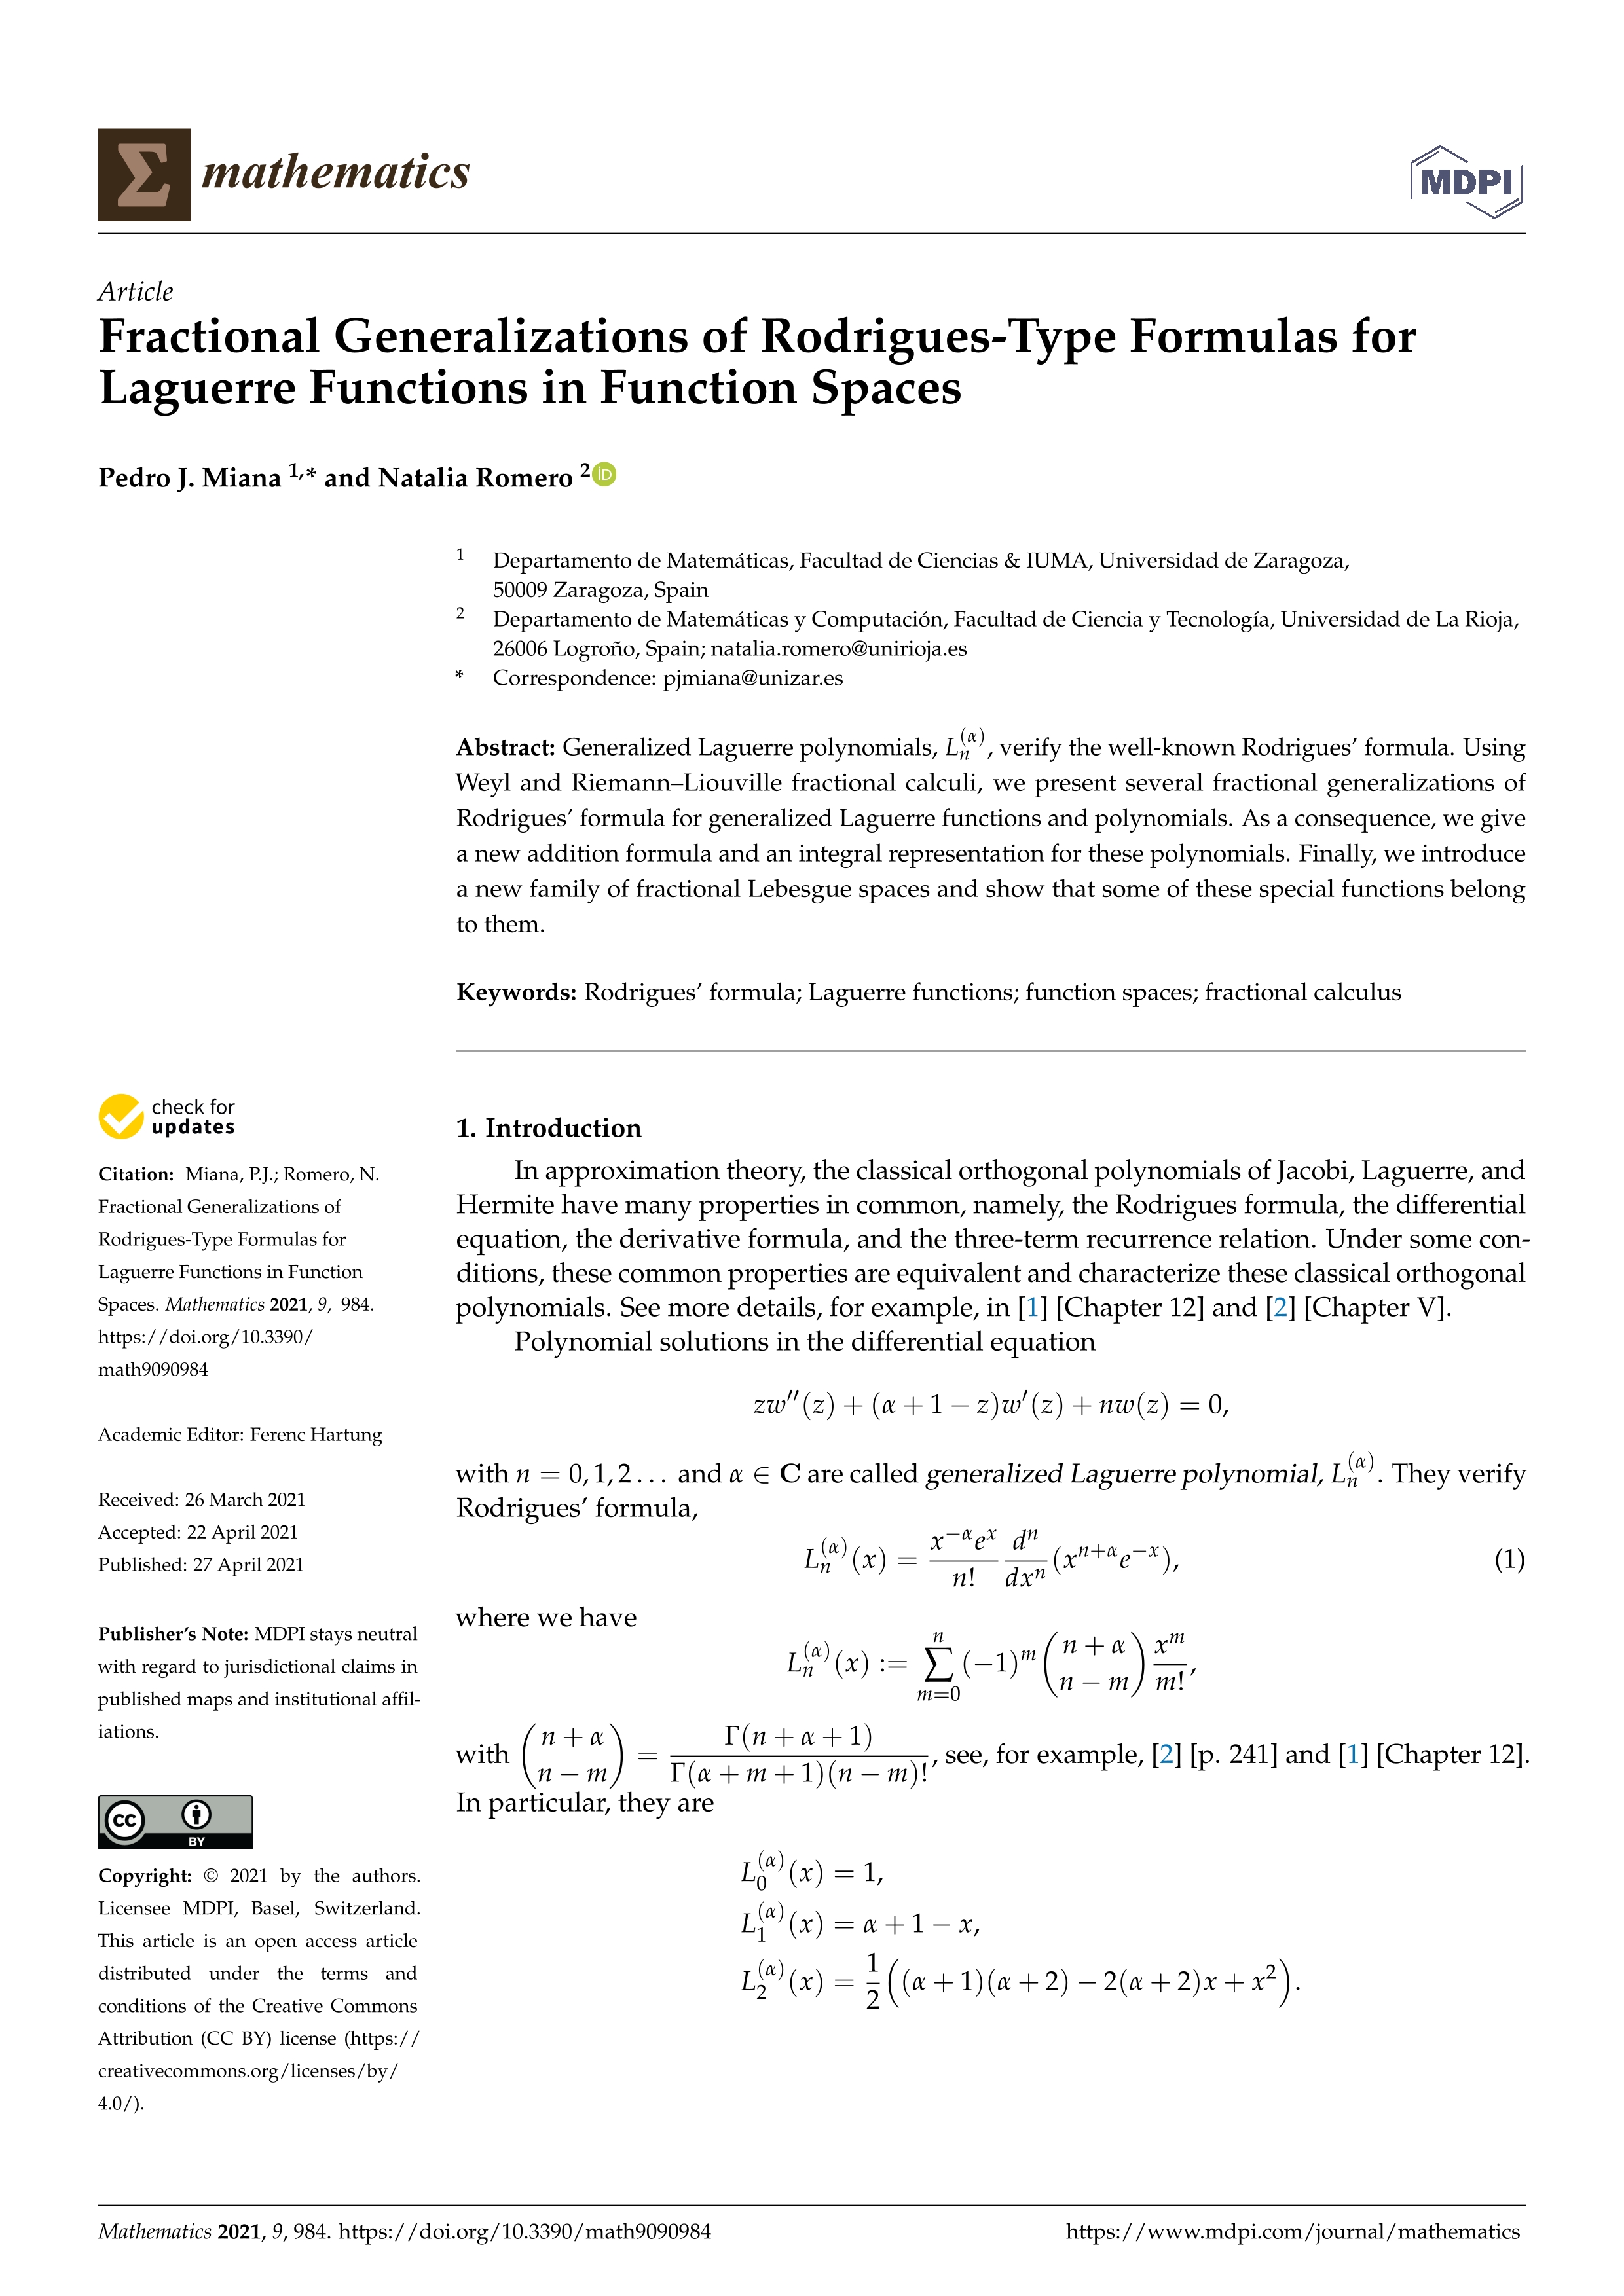 Fractional generalizations of Rodrigues-type formulas for Laguerre functions in function spaces